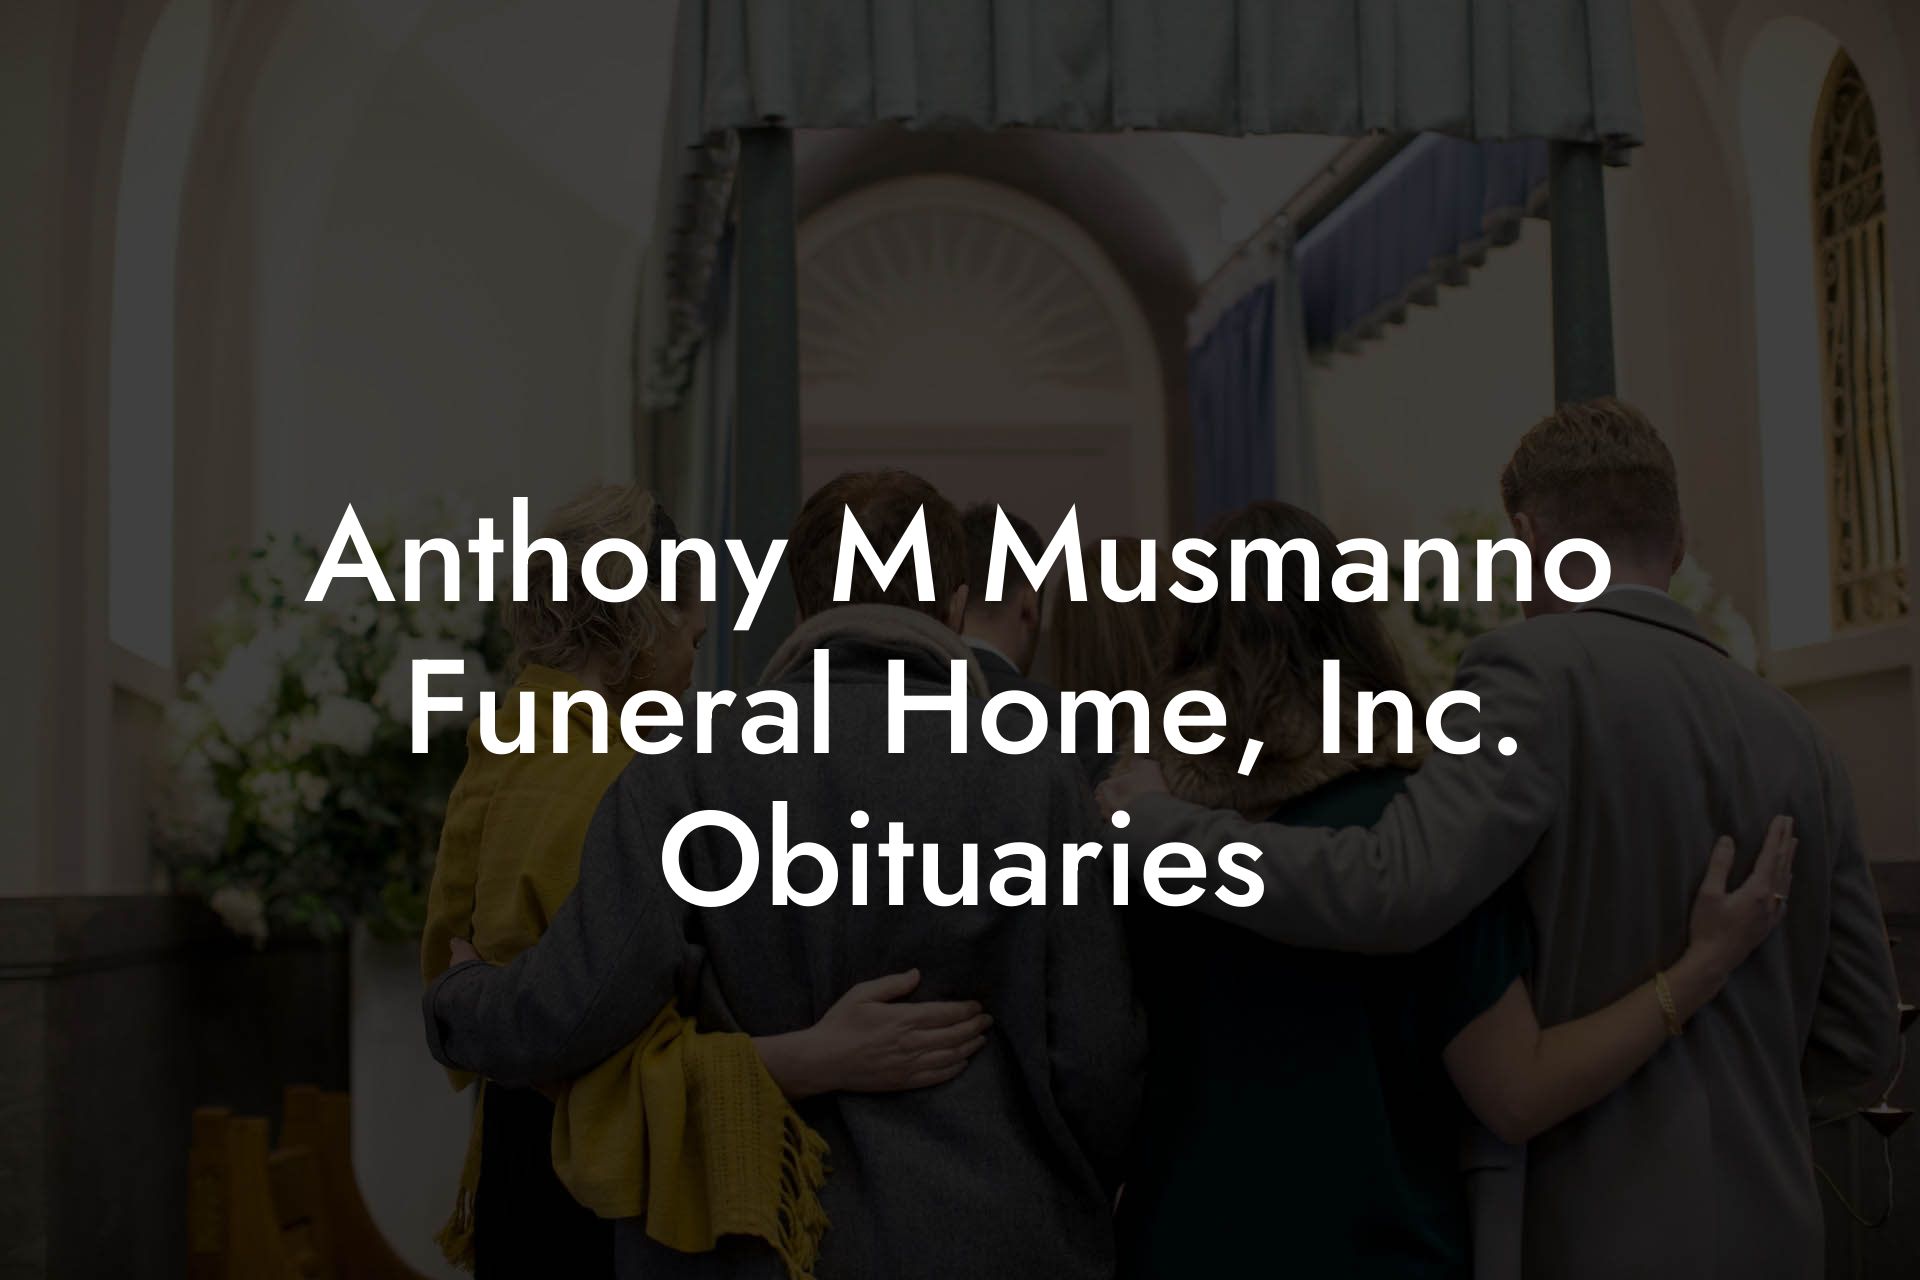 Anthony M Musmanno Funeral Home, Inc. Obituaries